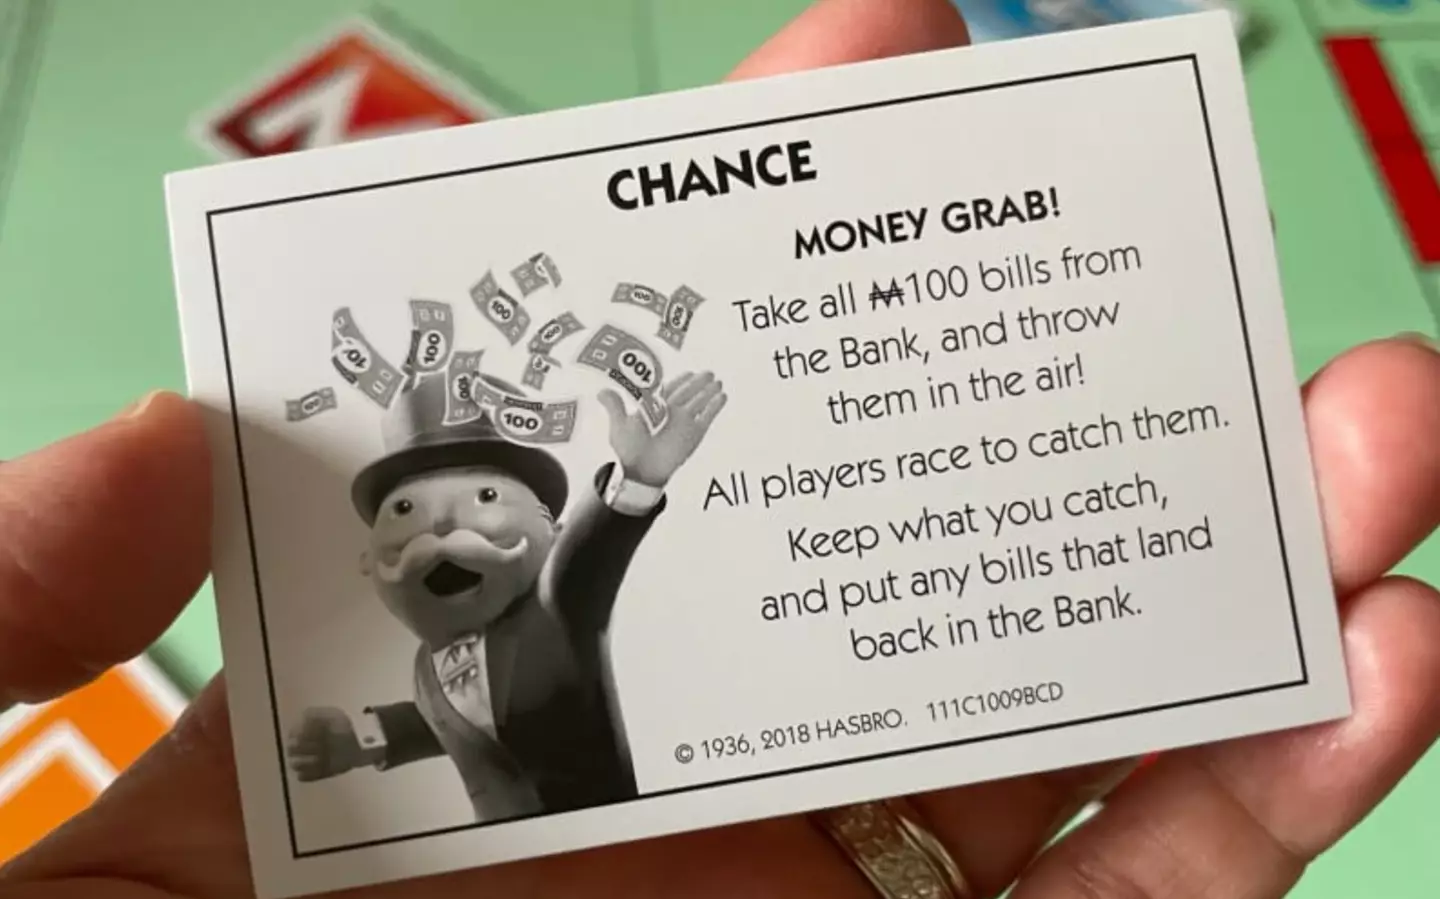 They money grab card could lead to chaos, especially if you're playing the game while drinking.